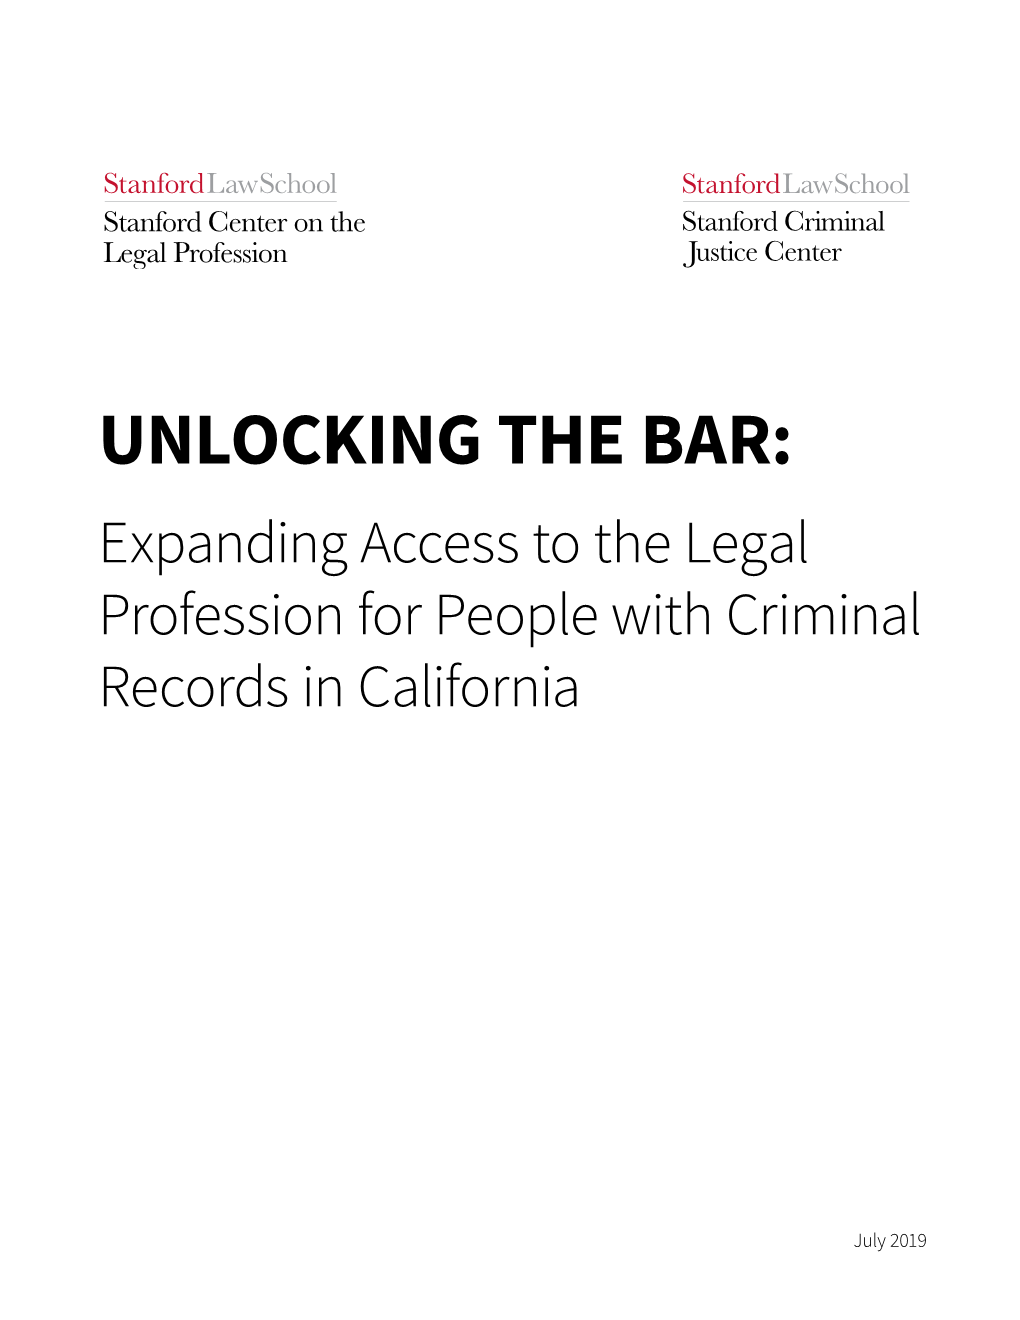 UNLOCKING the BAR: Expanding Access to the Legal Profession for People with Criminal Records in California